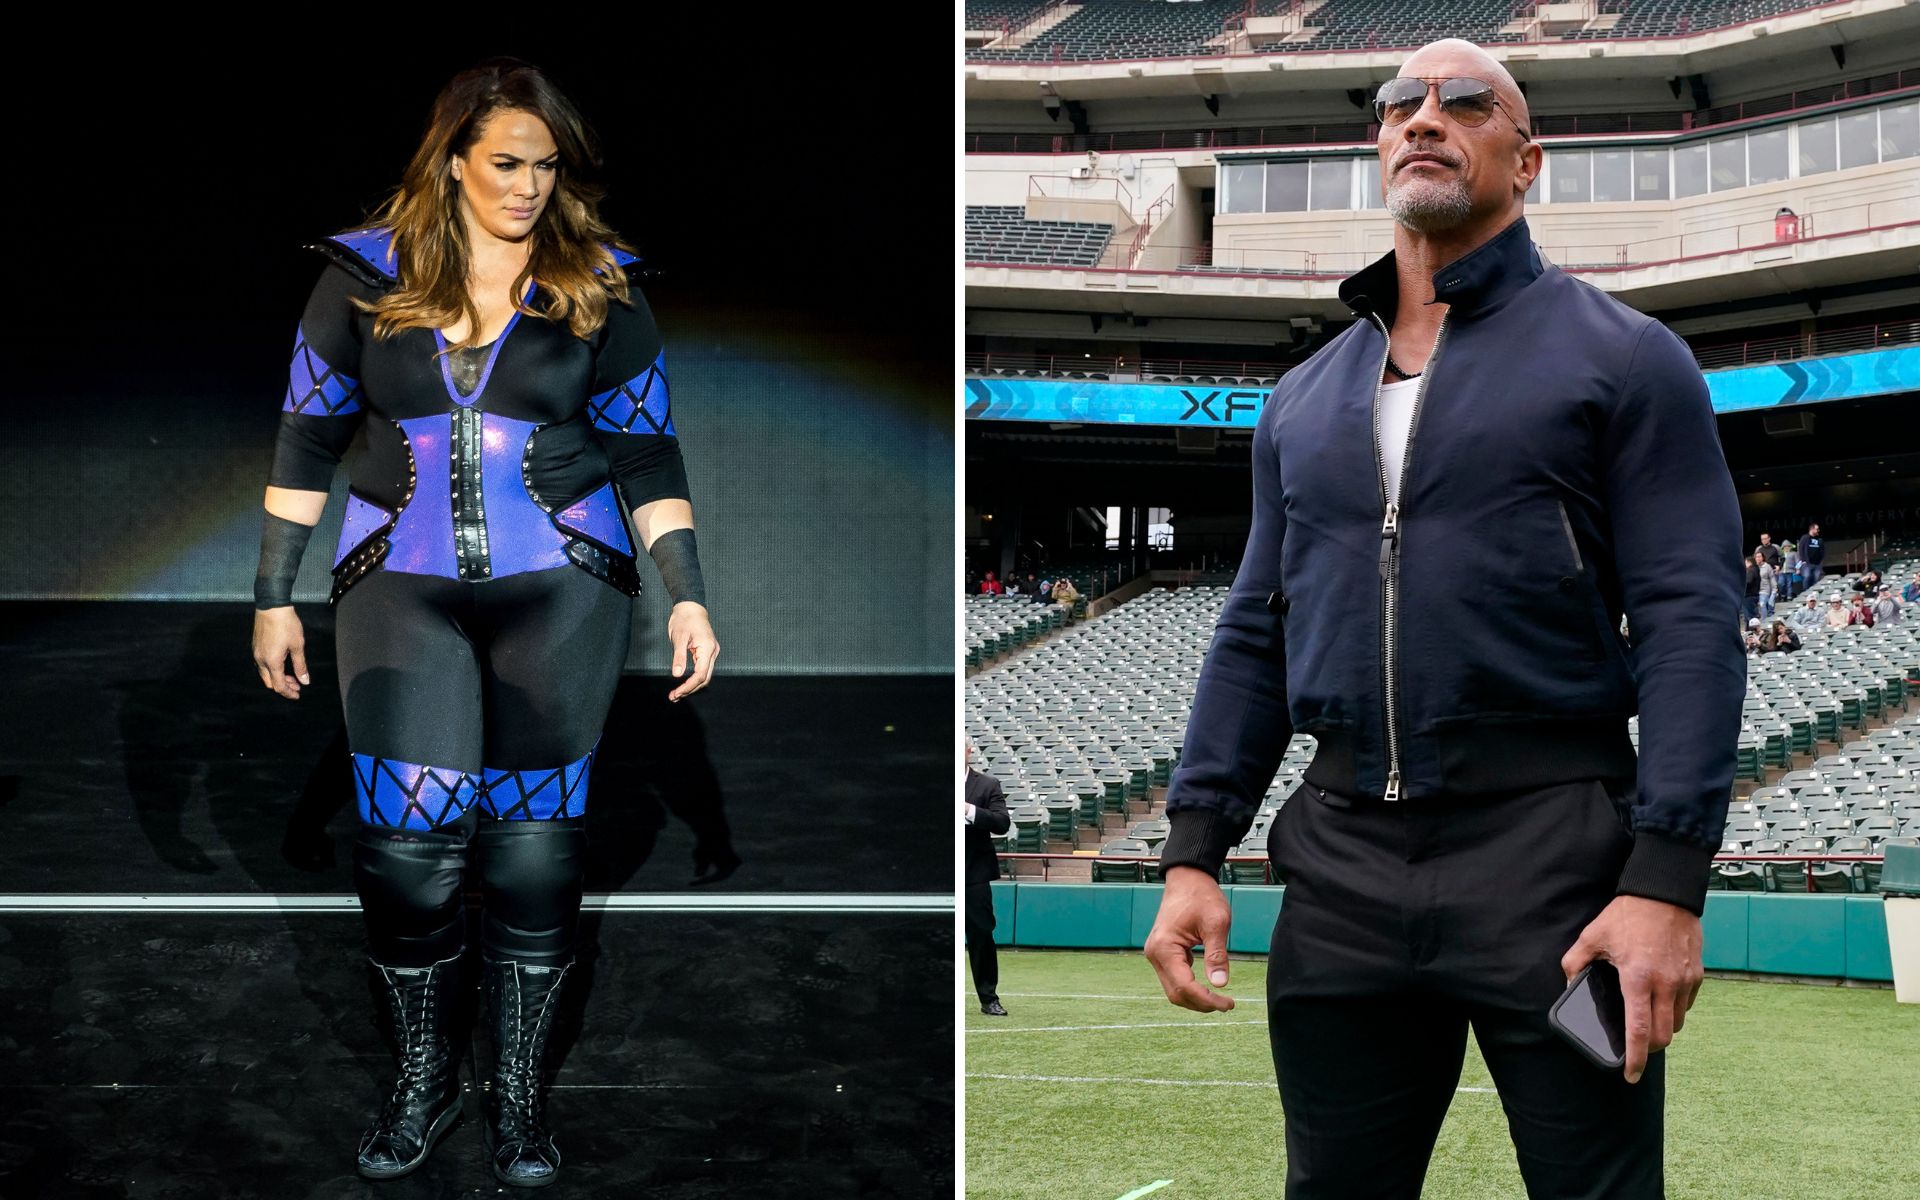 Is Nia Jax related to The Rock?